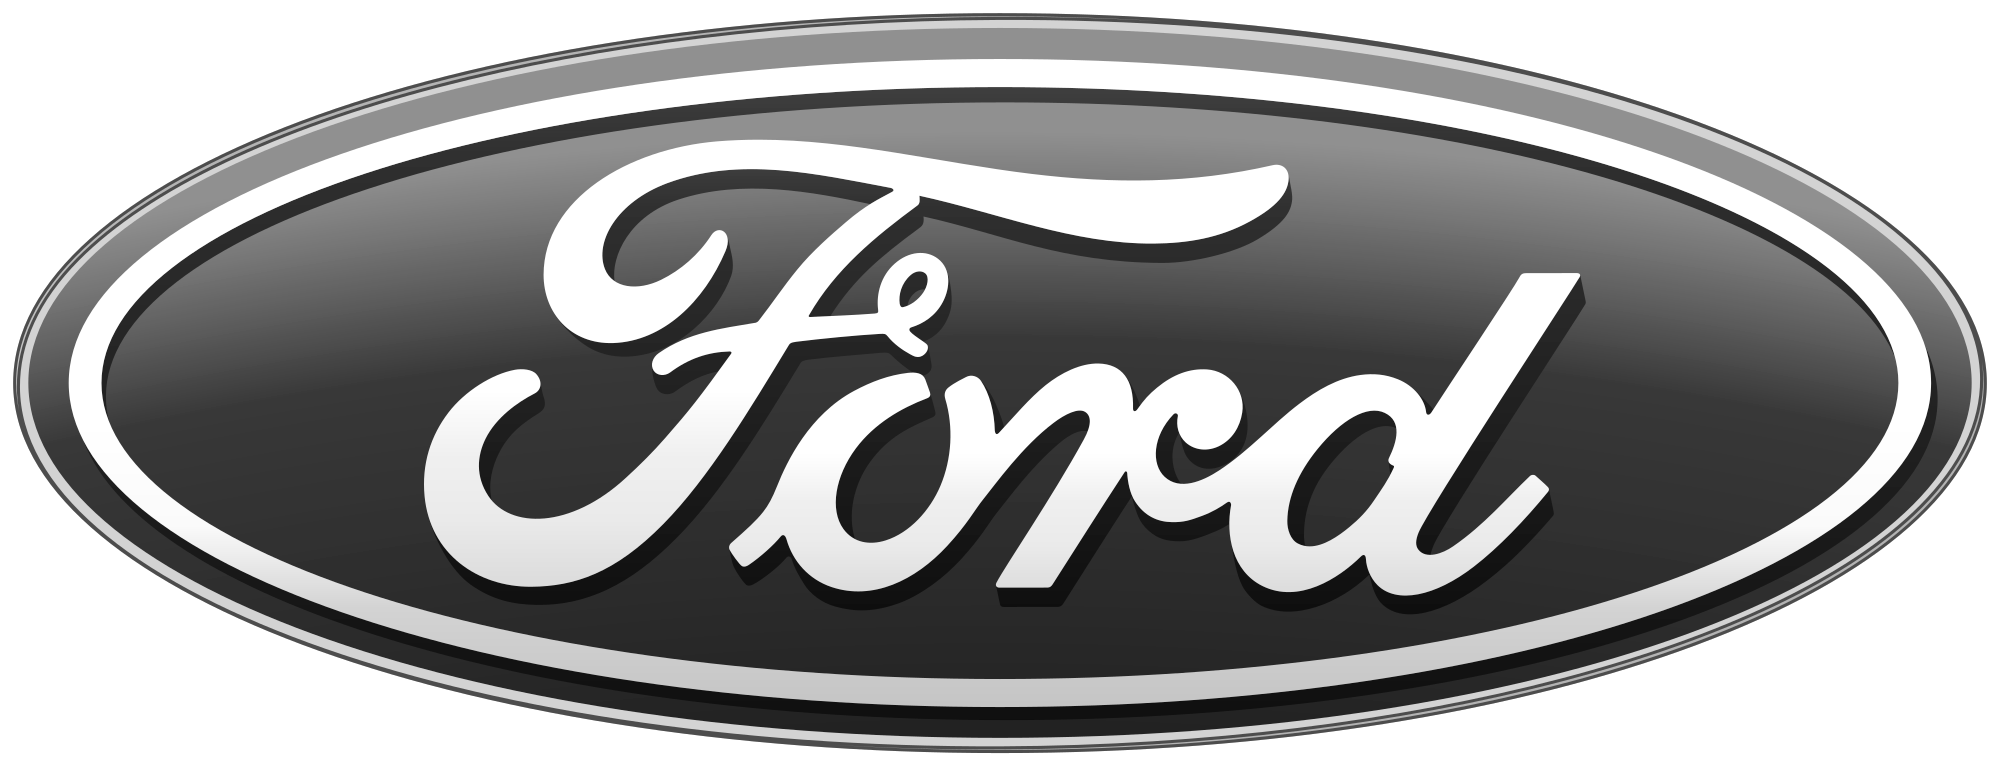 Ford_logo_PNG1